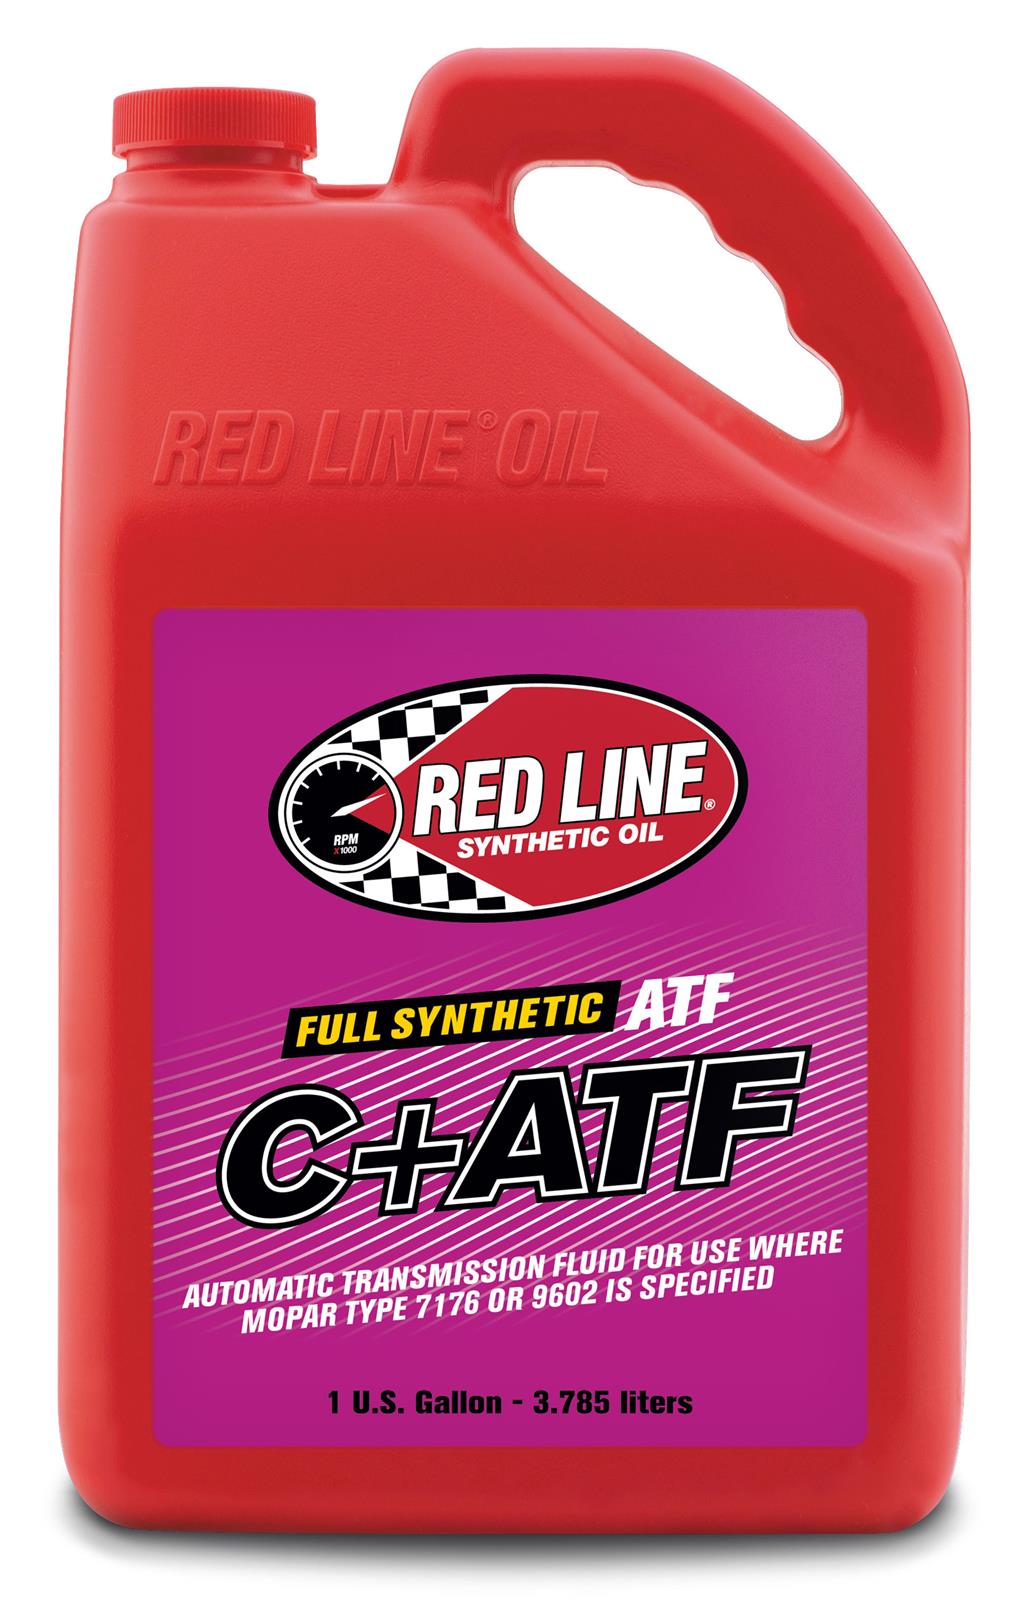 Red Line Synthetic Oil 30605 Red Line C-Plus Automatic